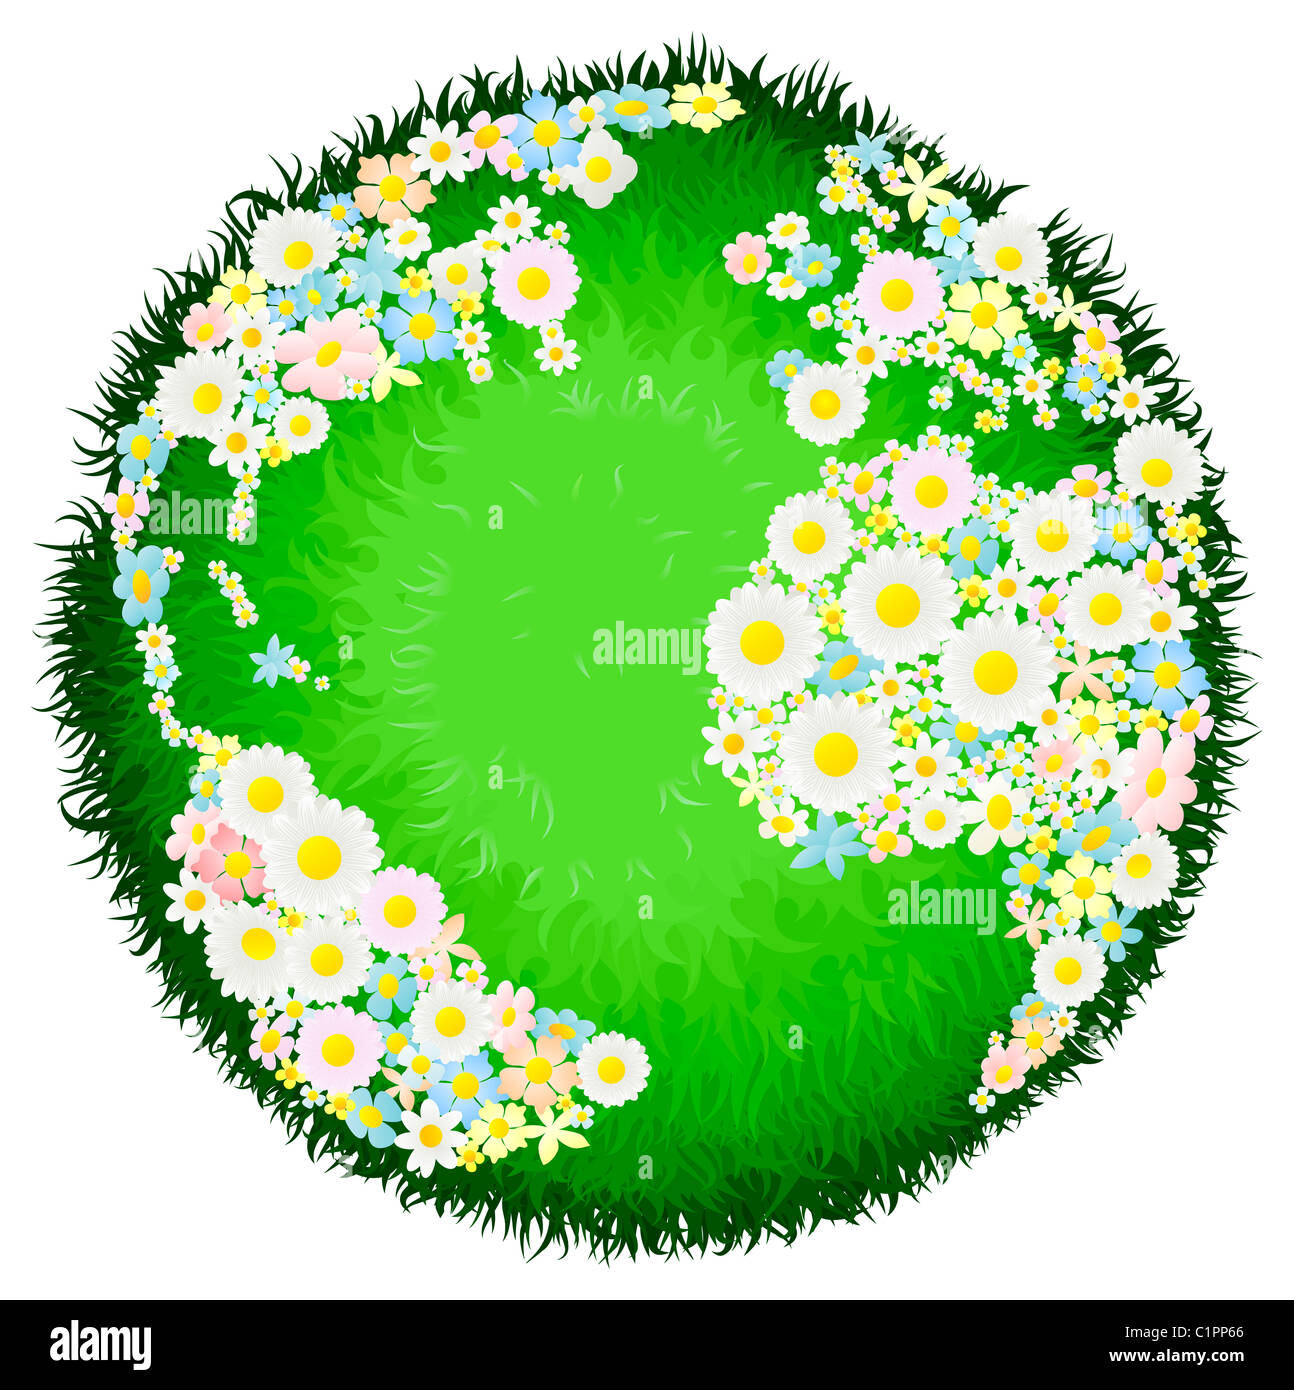 A world earth globe with continents made up of flowers and seas as grass. Concept for environmental issues or peace. Stock Photo